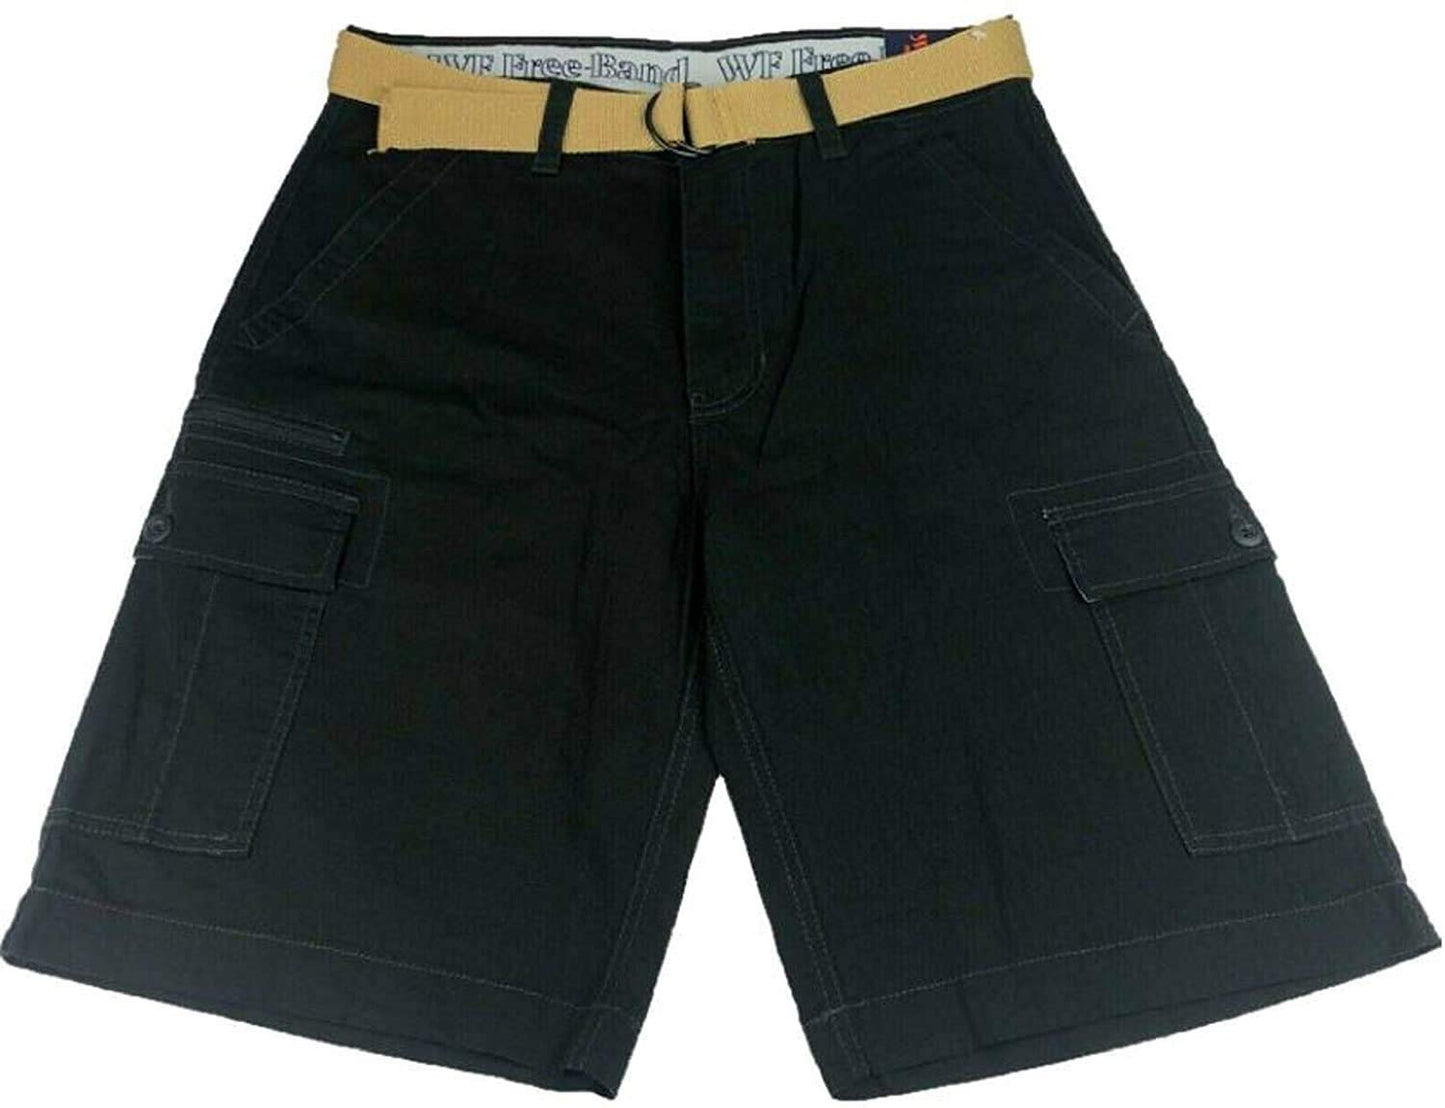 Wearfirst Men's Free-Band Stretch Shorts with Flex Waistband and D-Ring Belt (Stretch Limo (Black), 32)